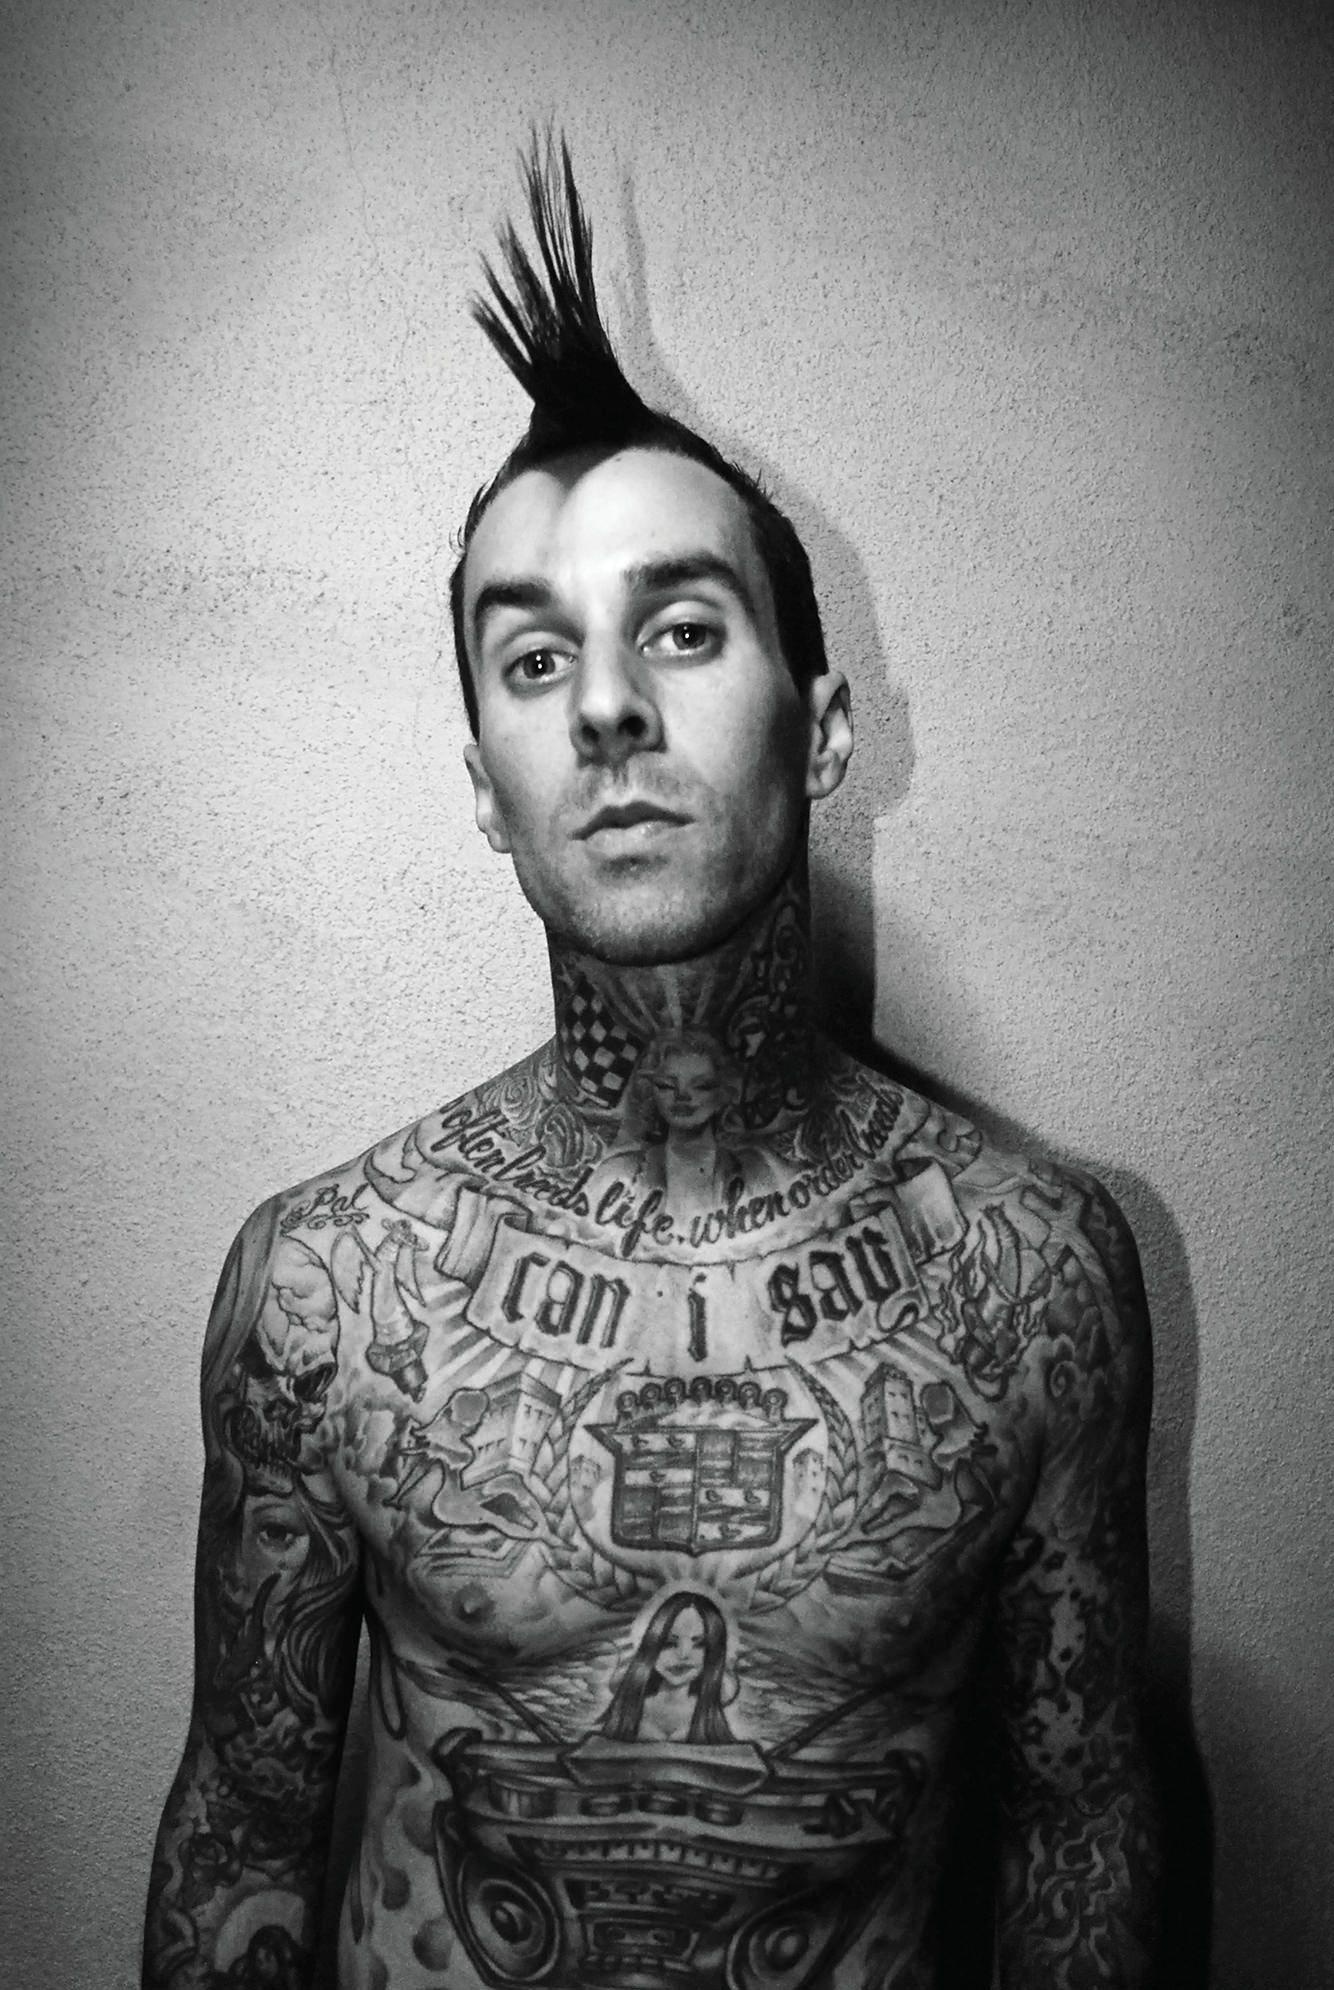 Travis Barker wallpapers, Top free backgrounds, Unique and artistic designs, Tribute to a talented musician, 1340x1990 HD Phone